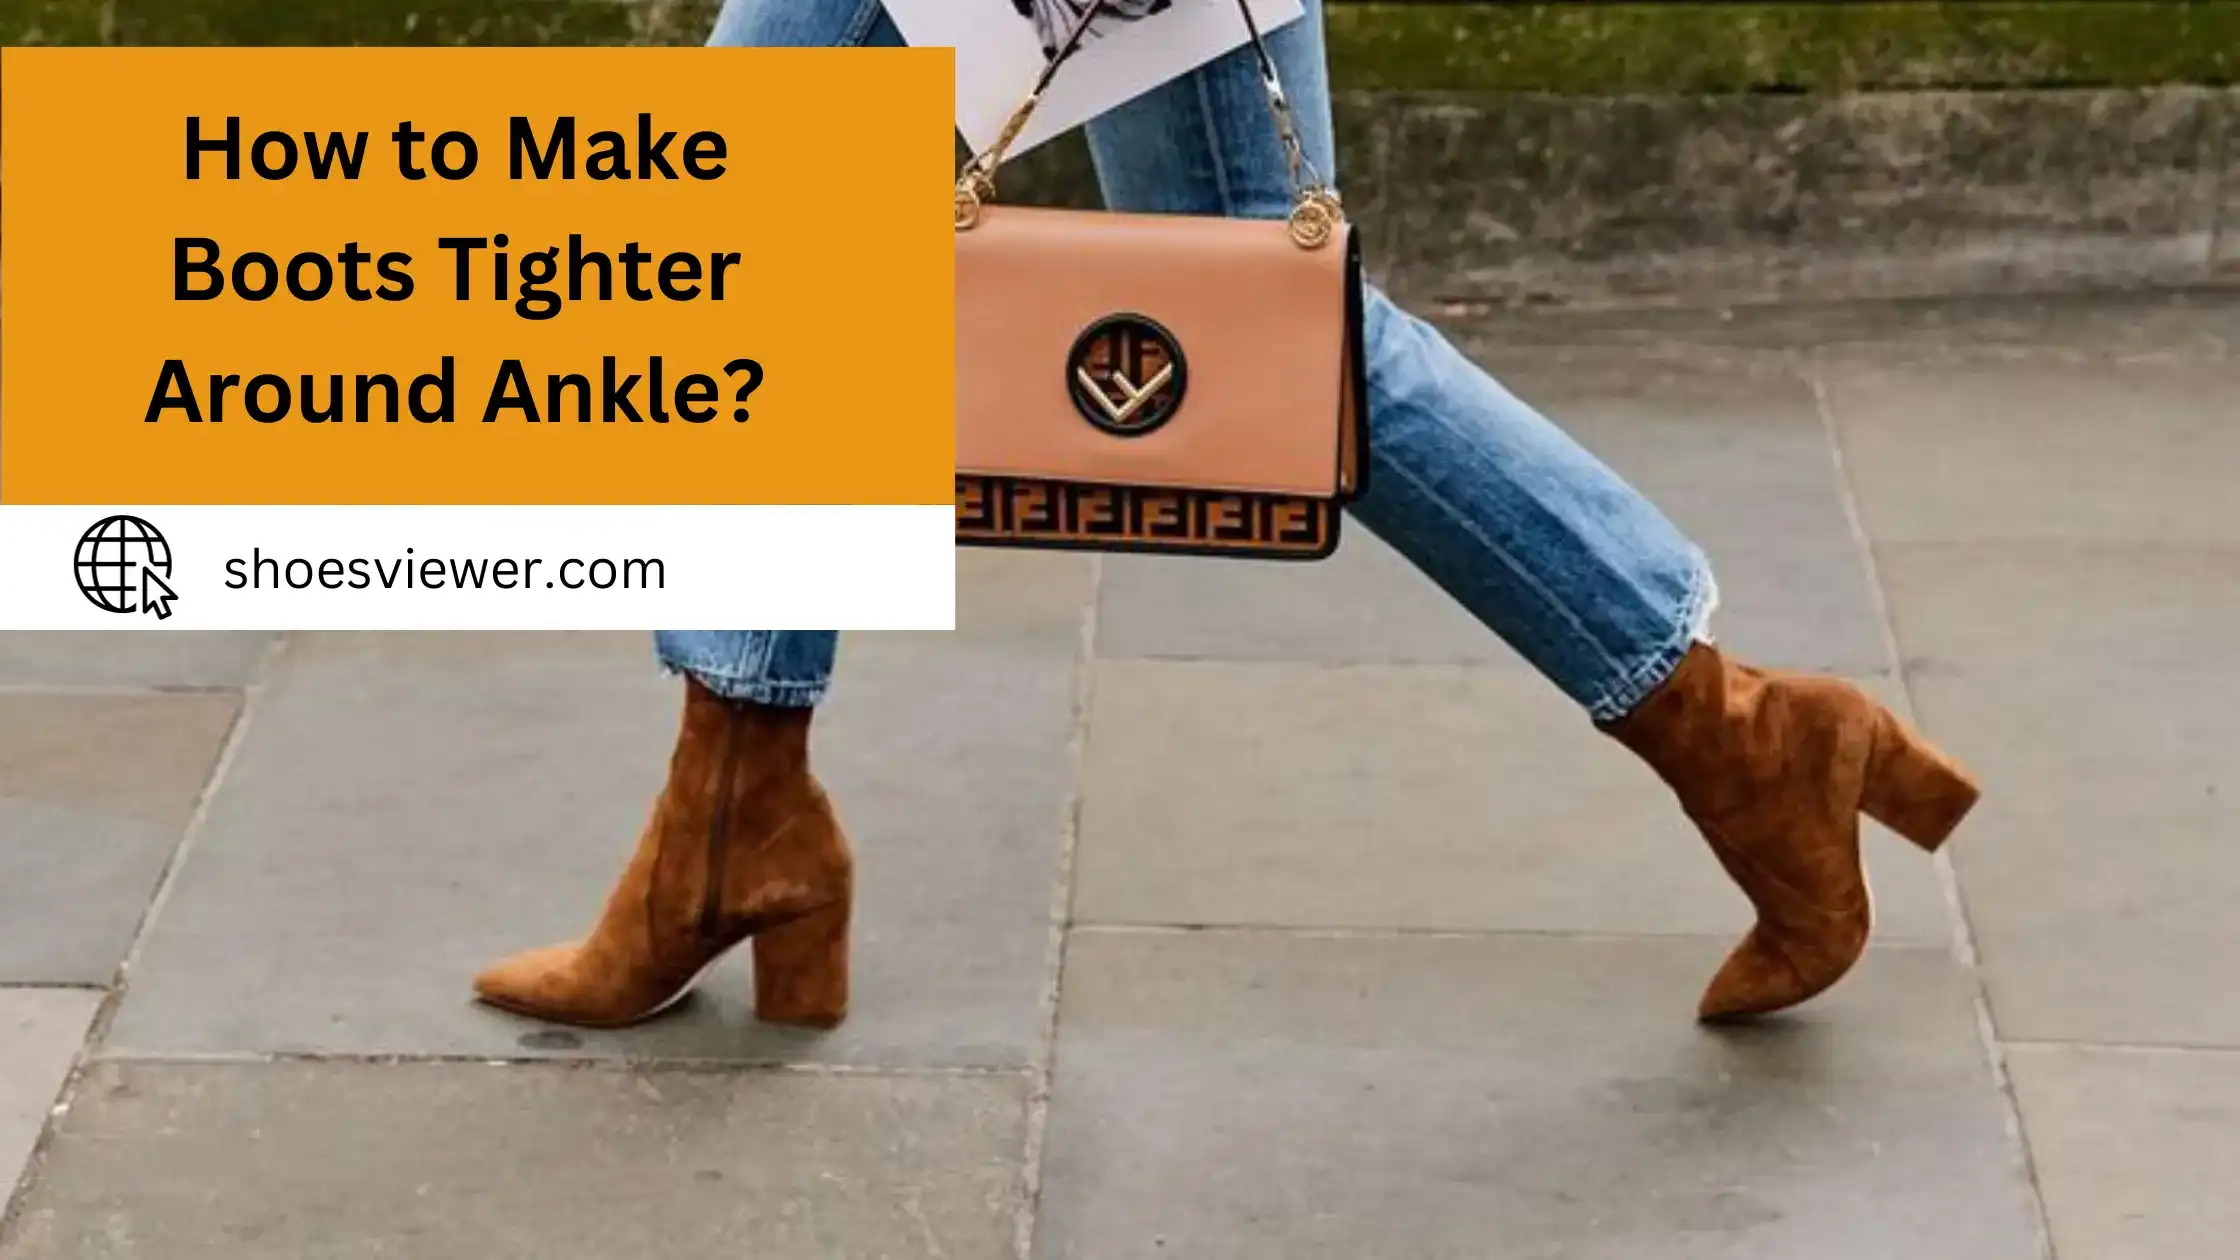 How to Make Boots Tighter Around Ankle? Tips and Tricks